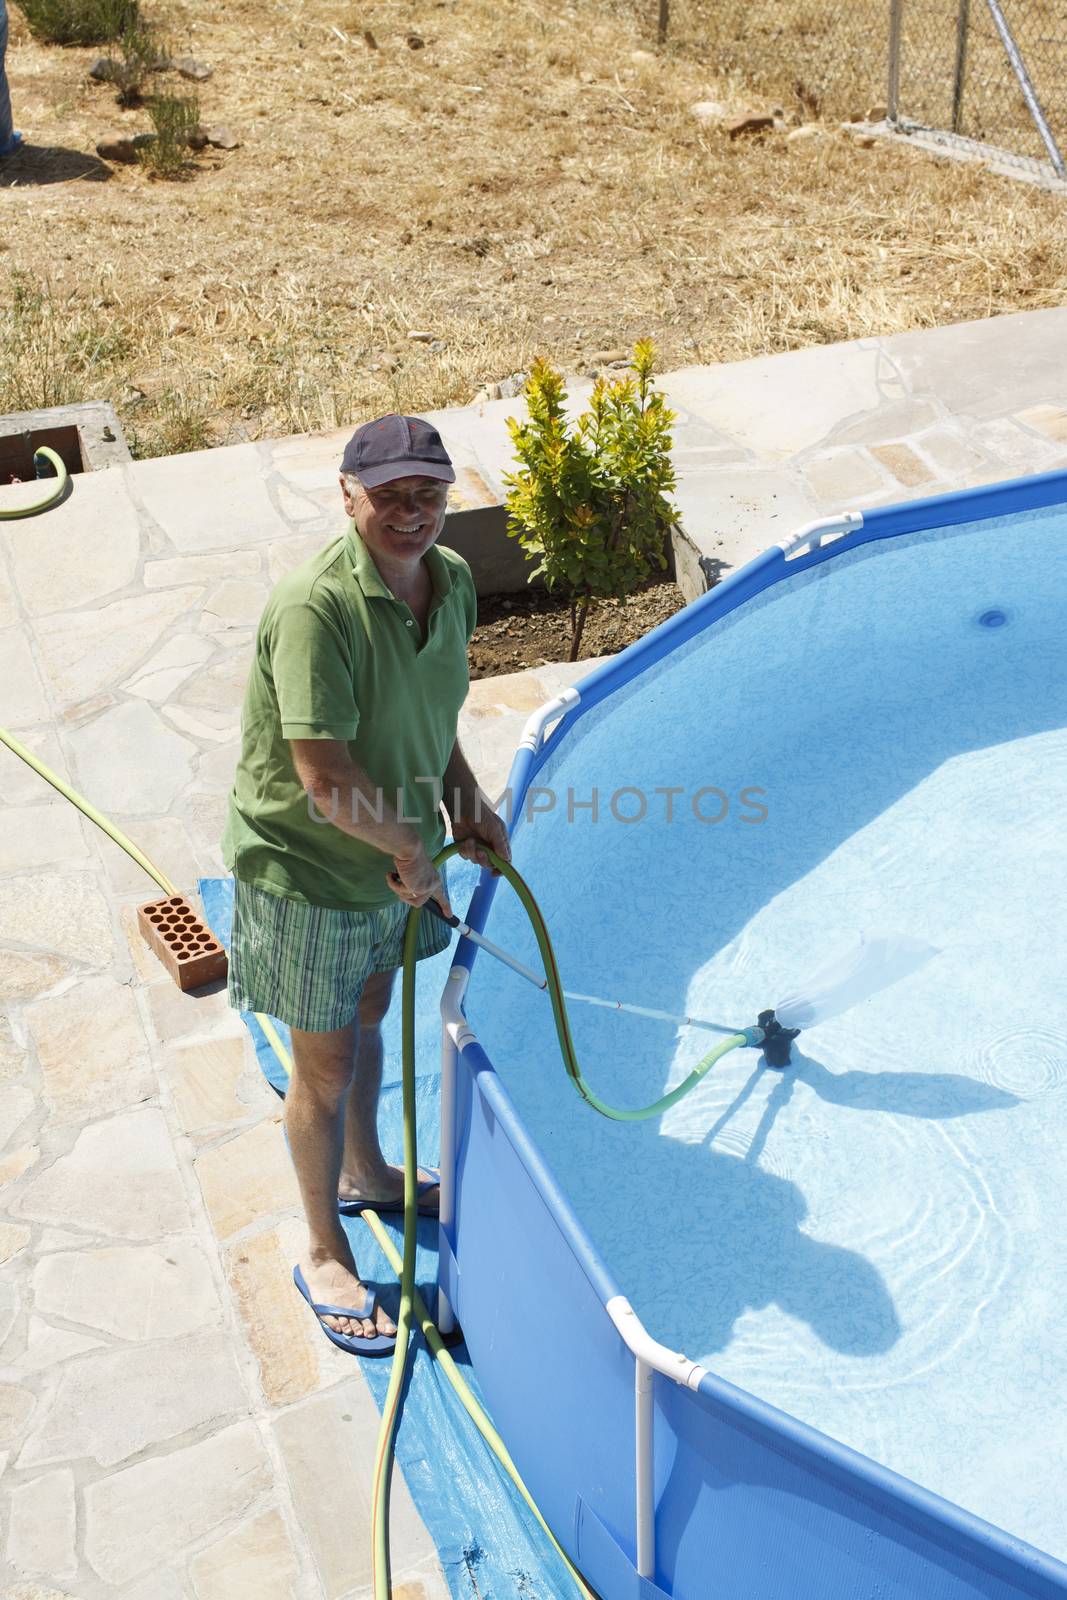 A senior man smiles while cleaning up the swimming pool at his garden.